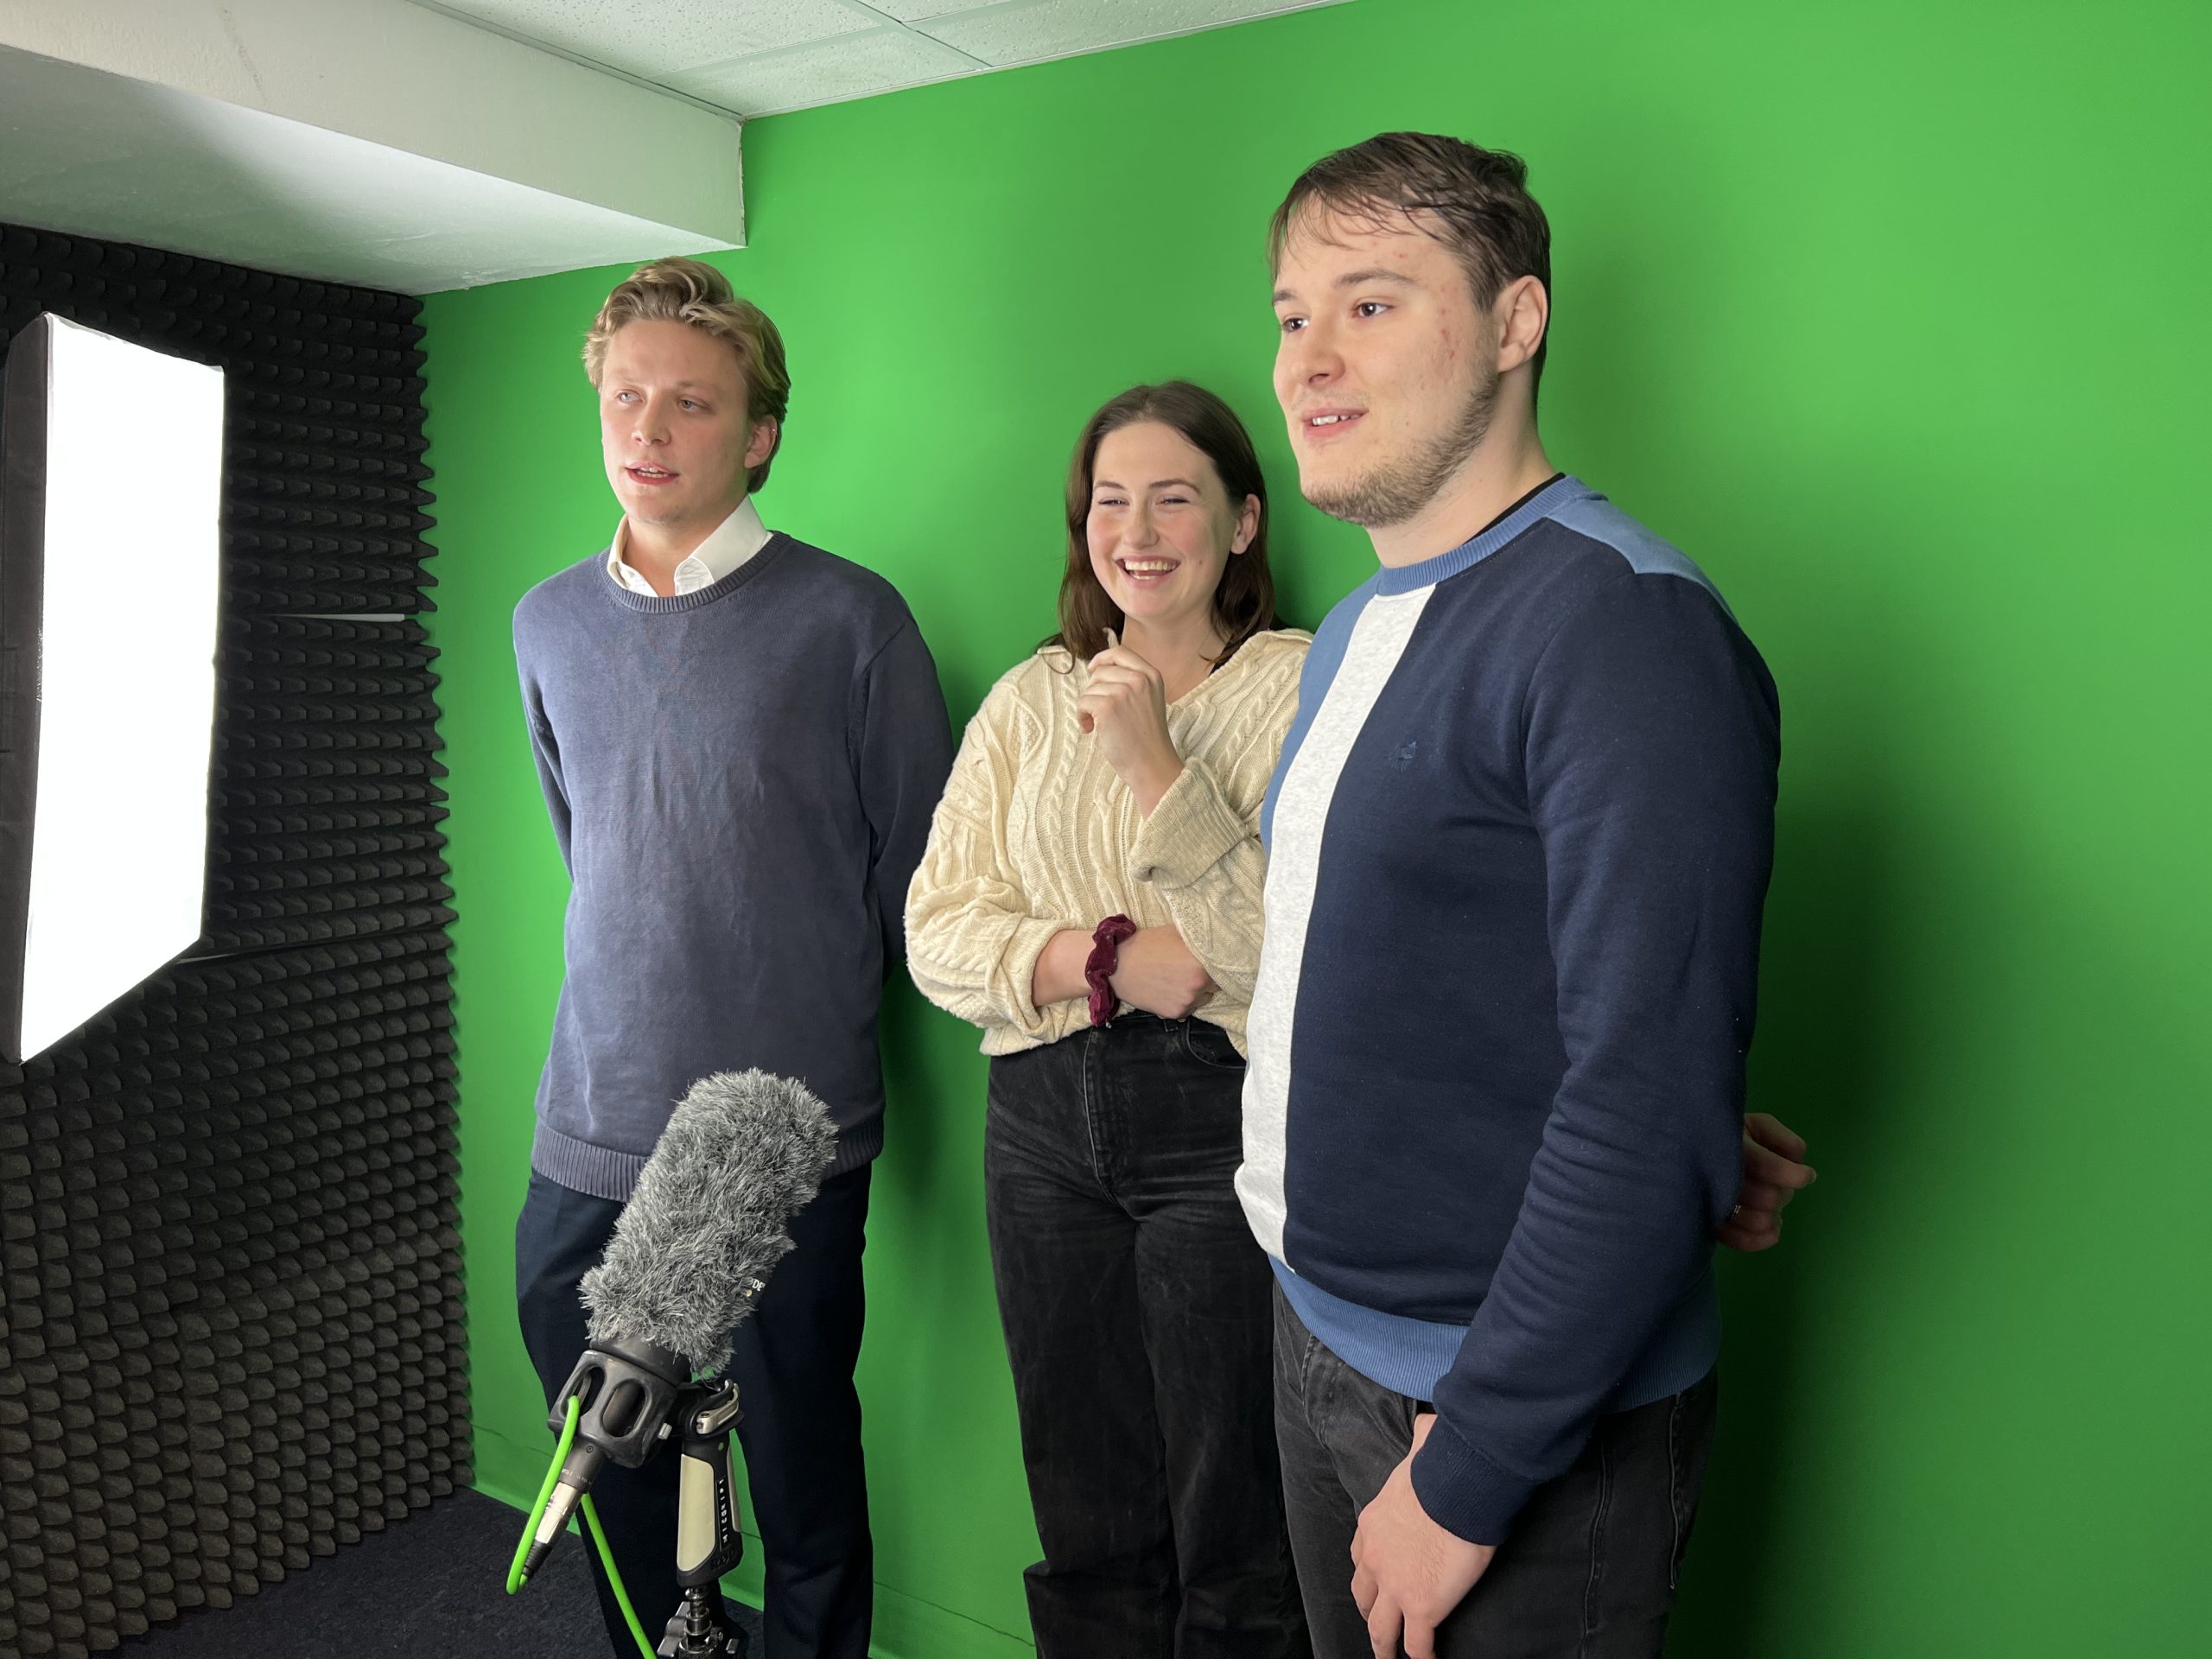 Three trainees are standing in front of a green screen and microphone in the School of Journalism studio.